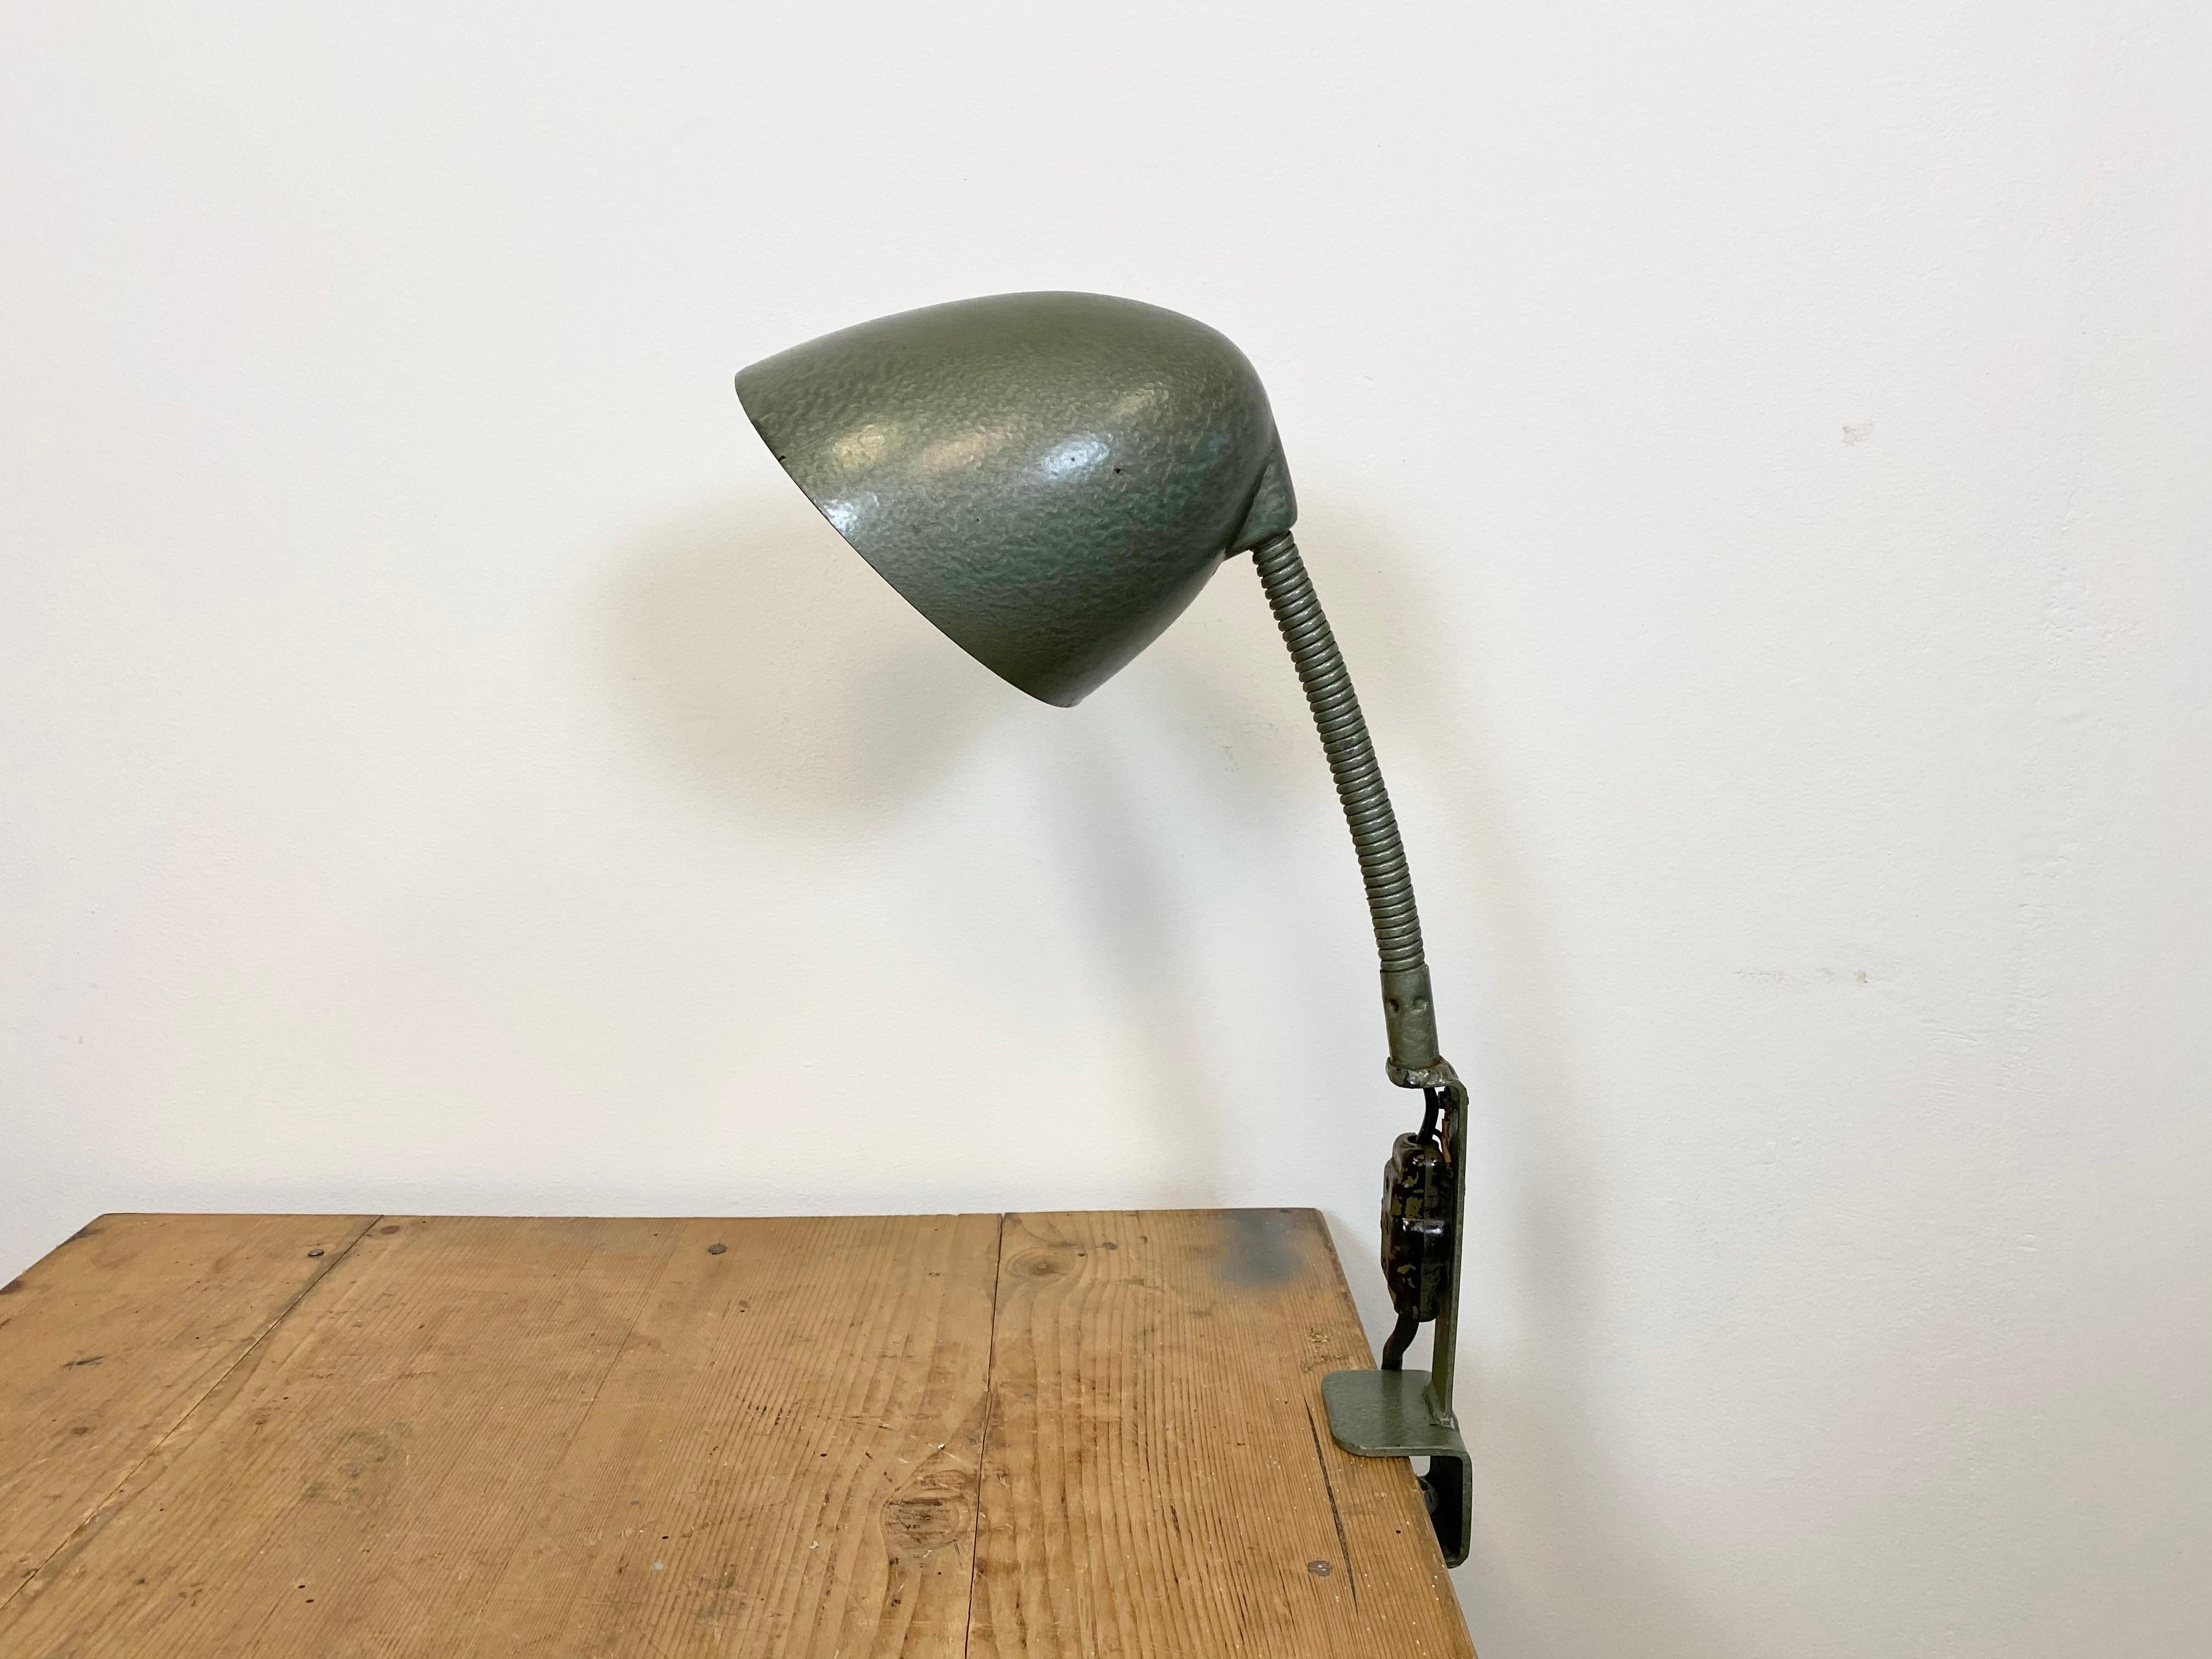 Green hammer paint industrial table lamp made by Elektroinstala Decín in former Czechoslovakia during the 1960s. It features a bakelite shade and iron gooseneck and clamp base. The original socket requires E 27 light bulbs. Original switch. New